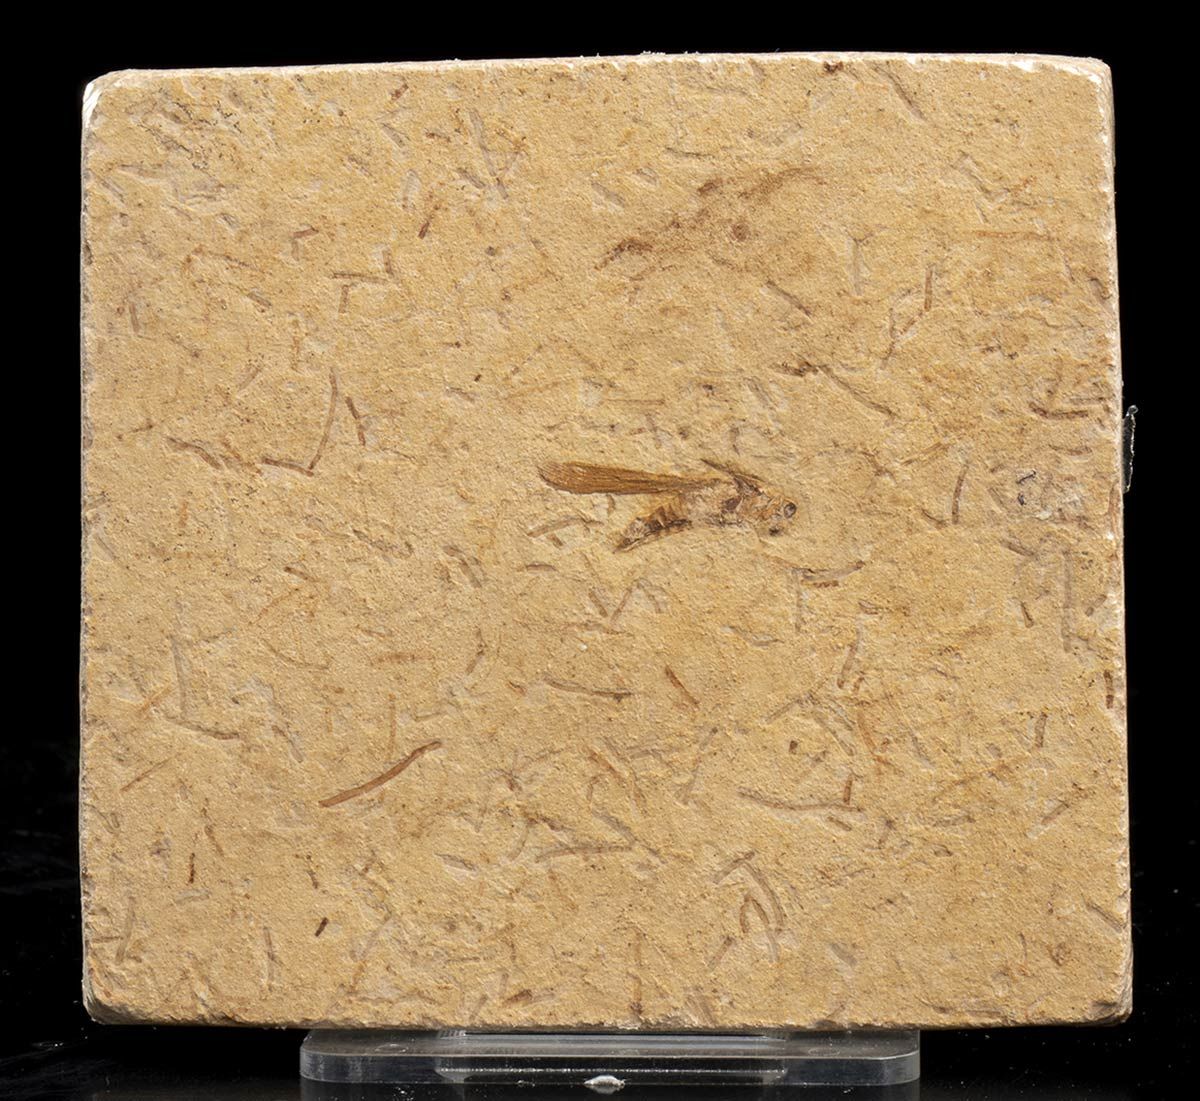 PLATE WITH FOSSIL INSECT 侏罗纪昆虫化石。尺寸为10 x 10厘米。